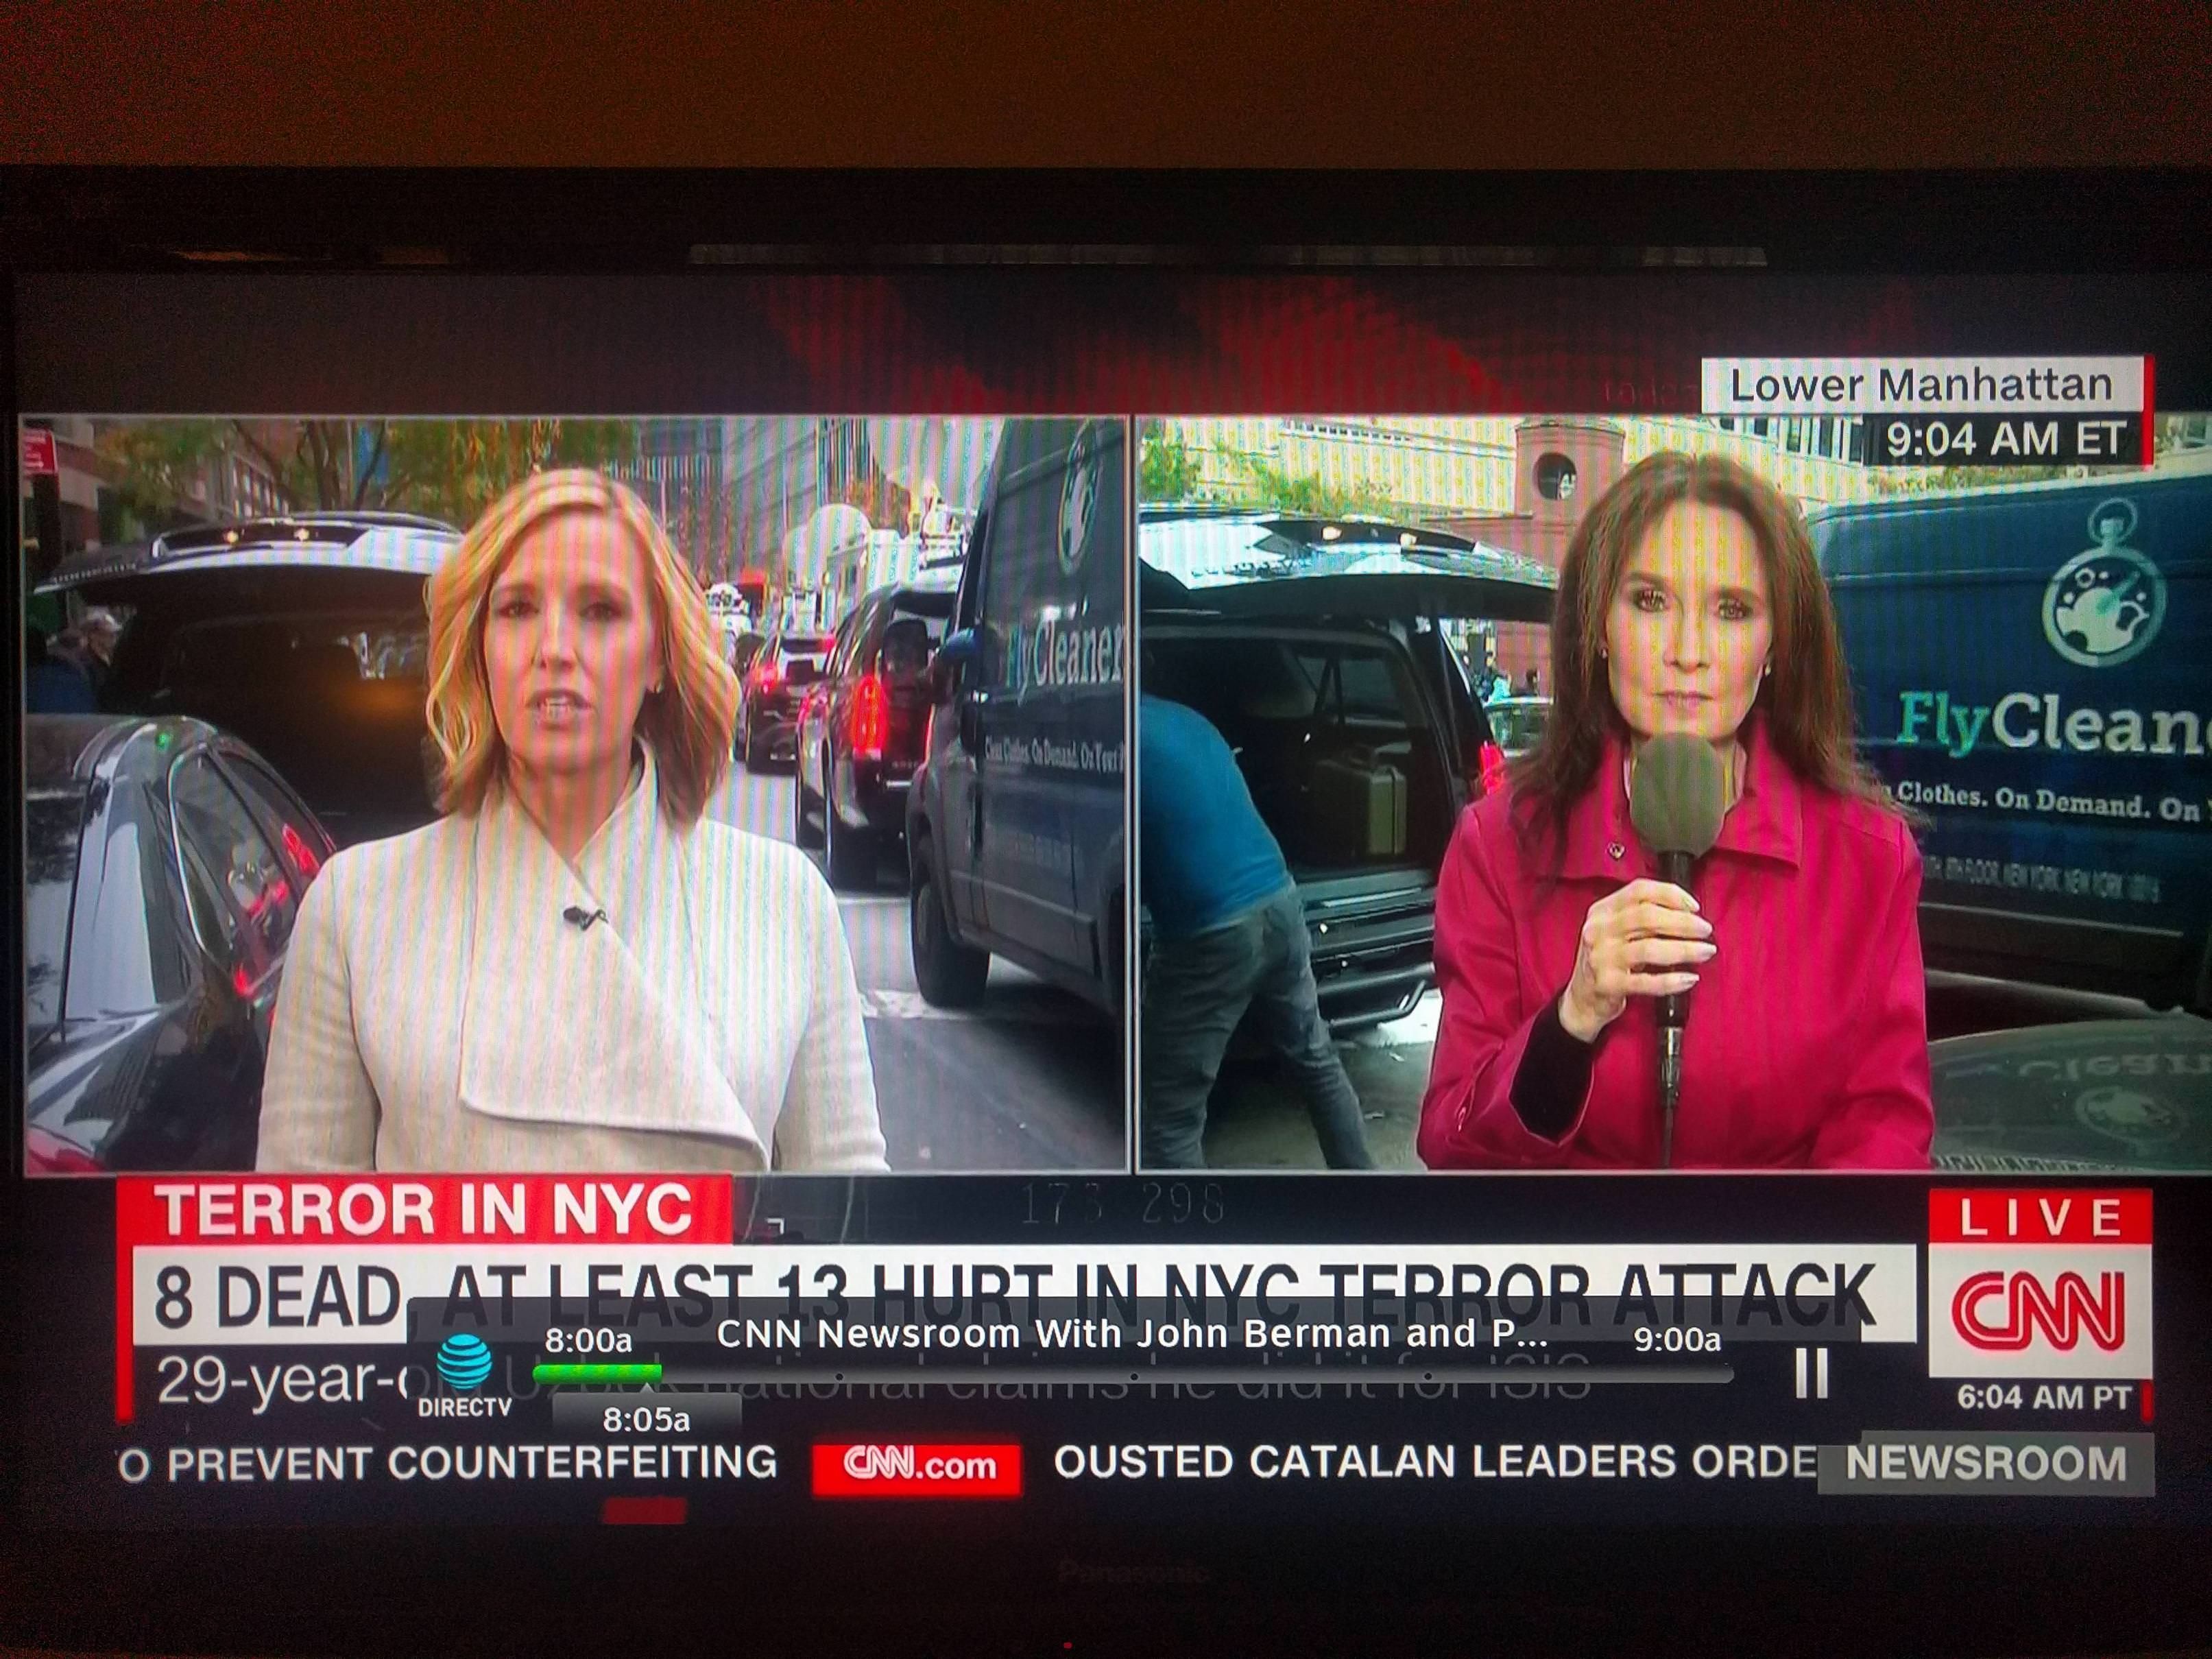 CNN never misses a chance for a remote broadcast